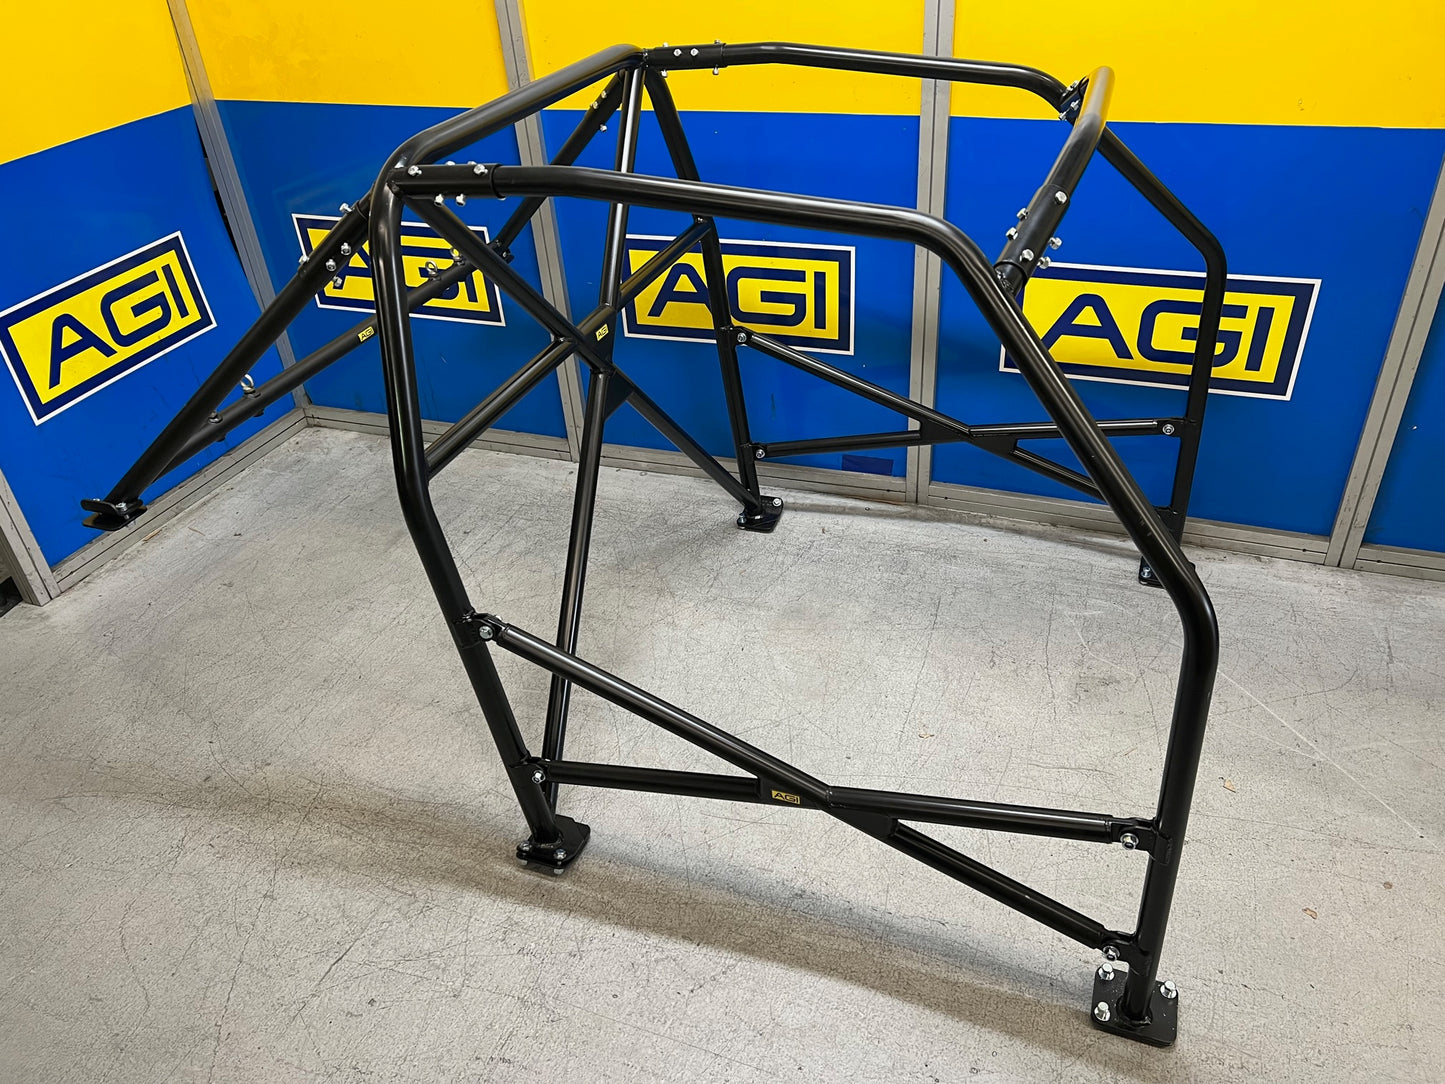 AGI roll cage MINI (BMW R56 GEN2) – 6PT – FULL CAGE (state level, double door bars)